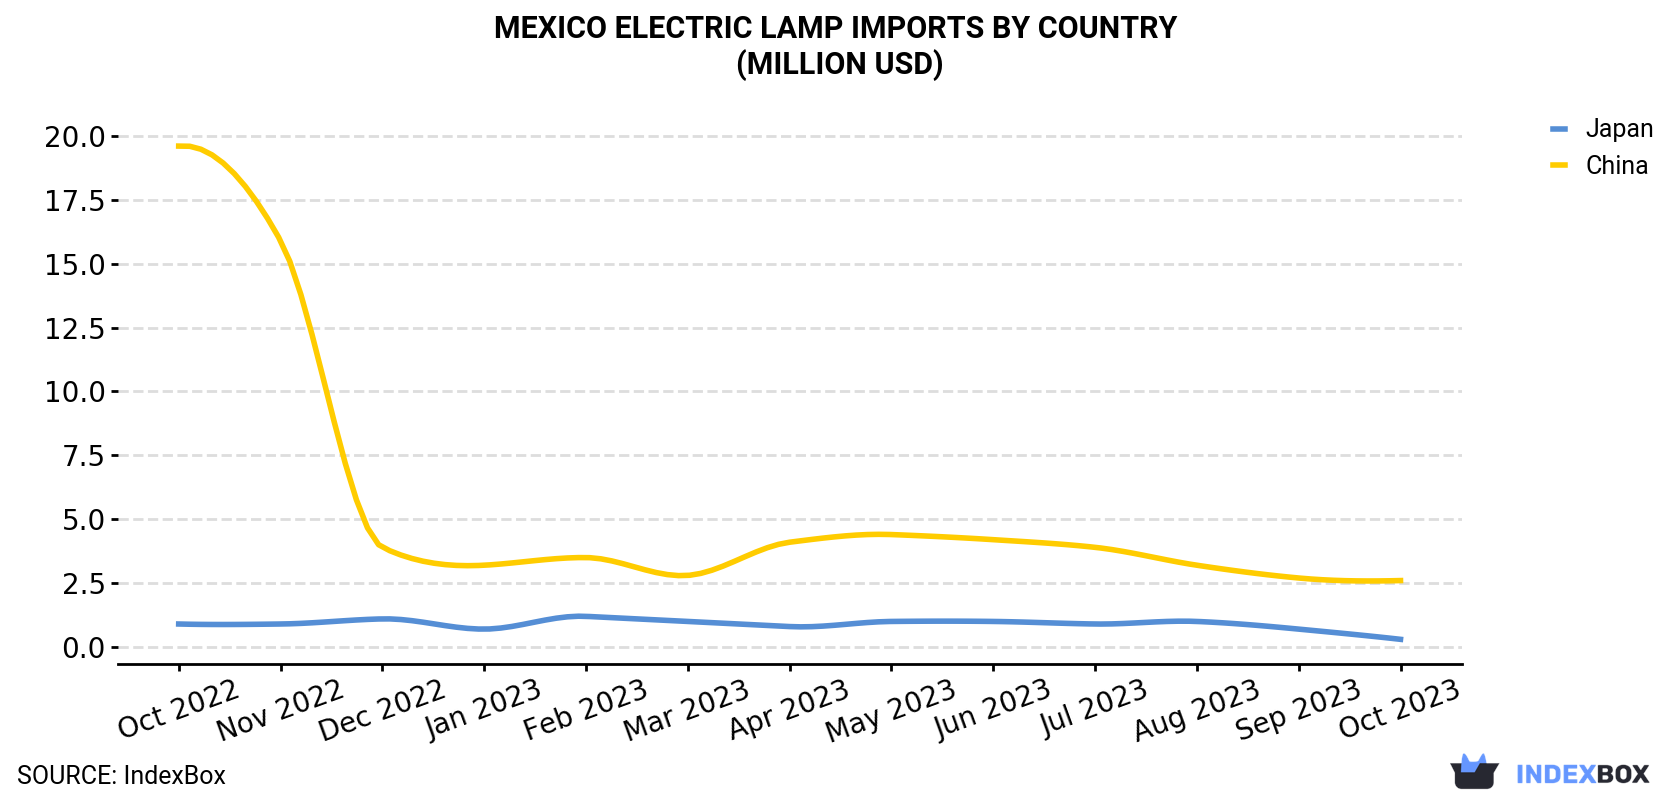 Mexico Electric Lamp Imports By Country (Million USD)